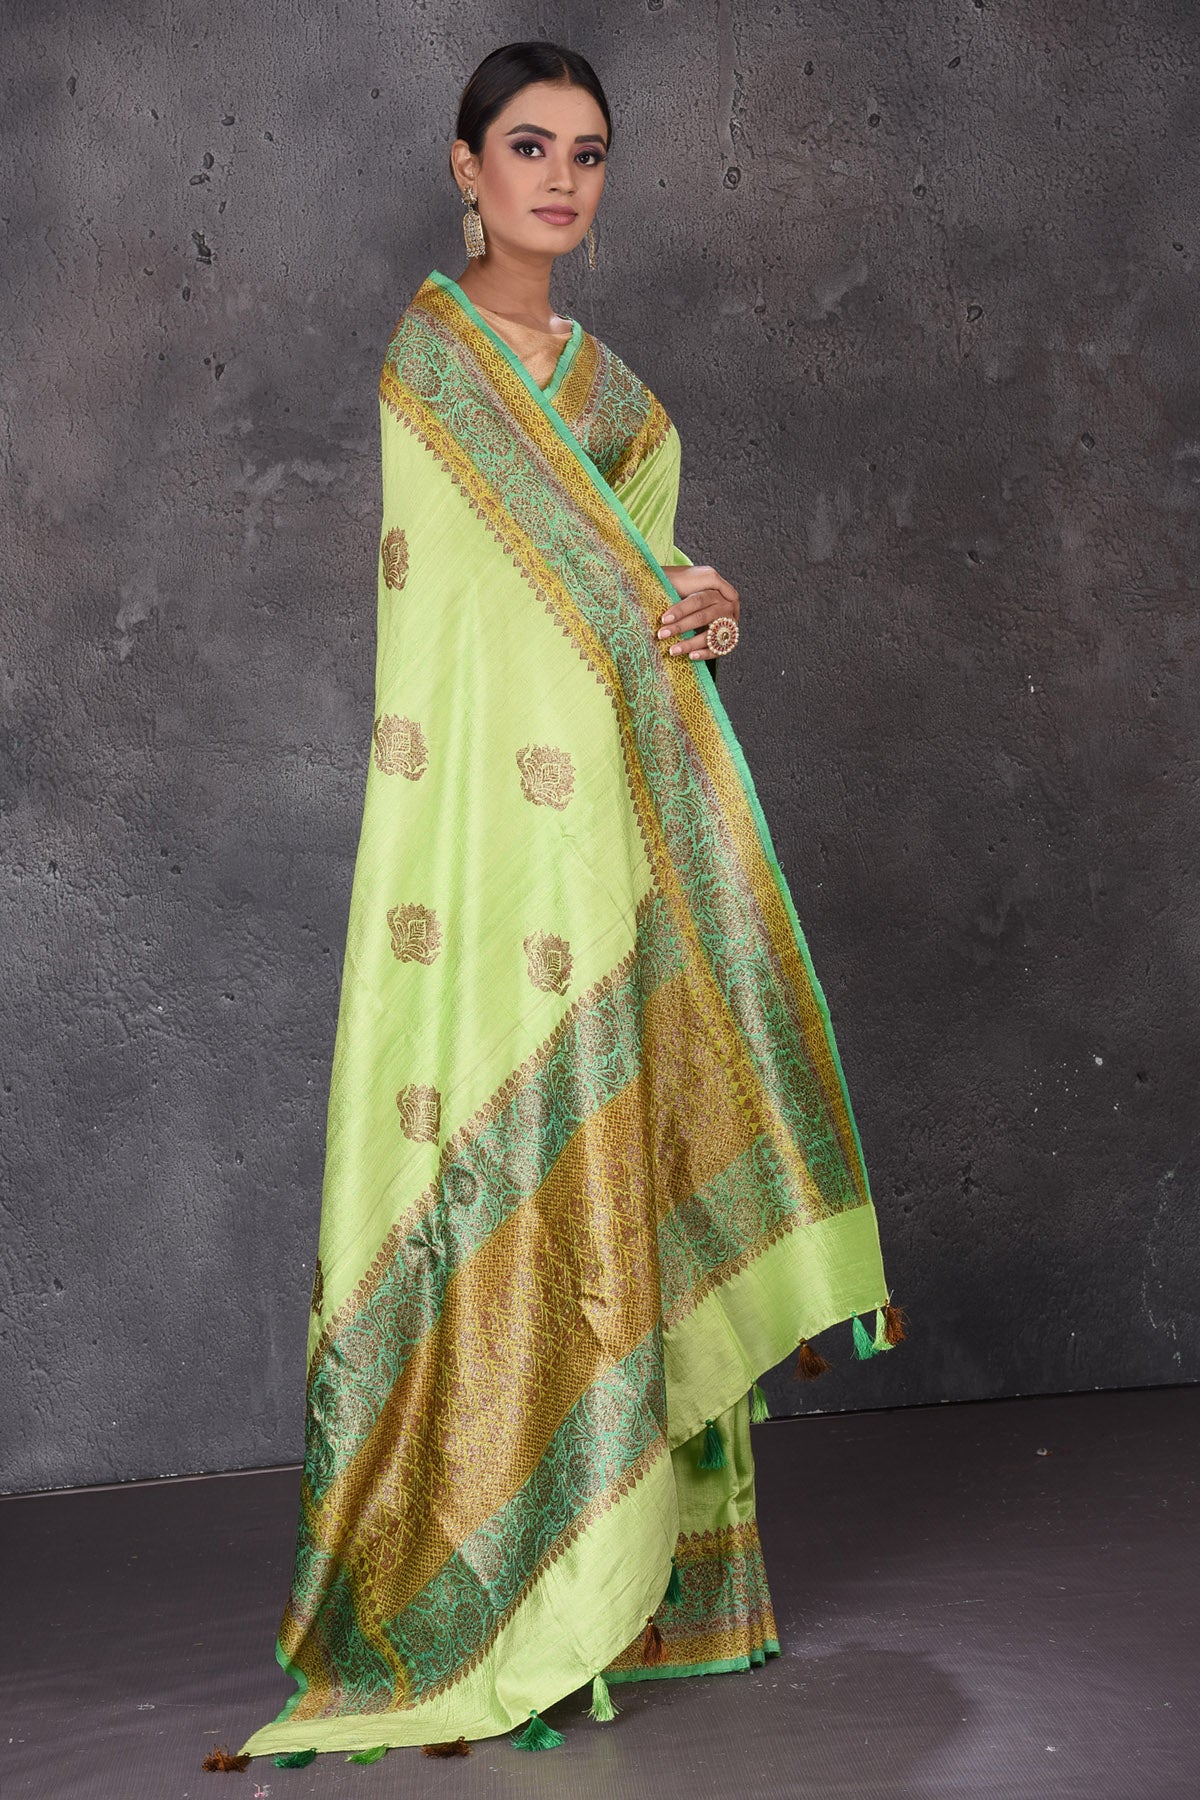 Buy beautiful pastel green dupion silk sari online in USA with antique zari border. Flaunt your ethnic style on special occasions with latest designer sarees, pure silk sarees, handwoven sarees, Kanchipuram silk sarees, embroidered sarees, georgette sarees, party sarees from Pure Elegance Indian saree store in USA.-side